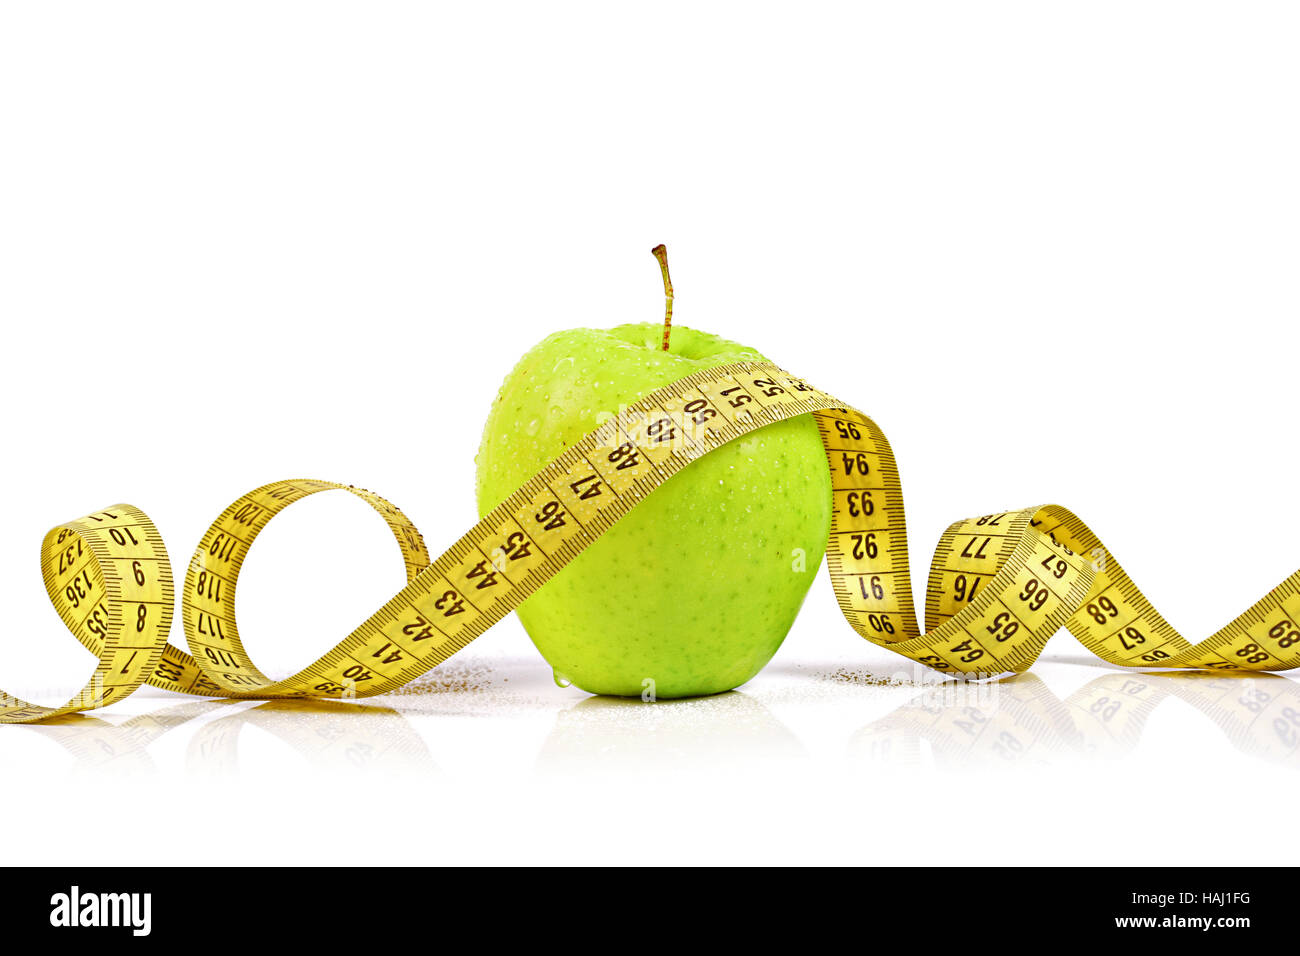 dieting - fresh apple with measuring tape Stock Photo